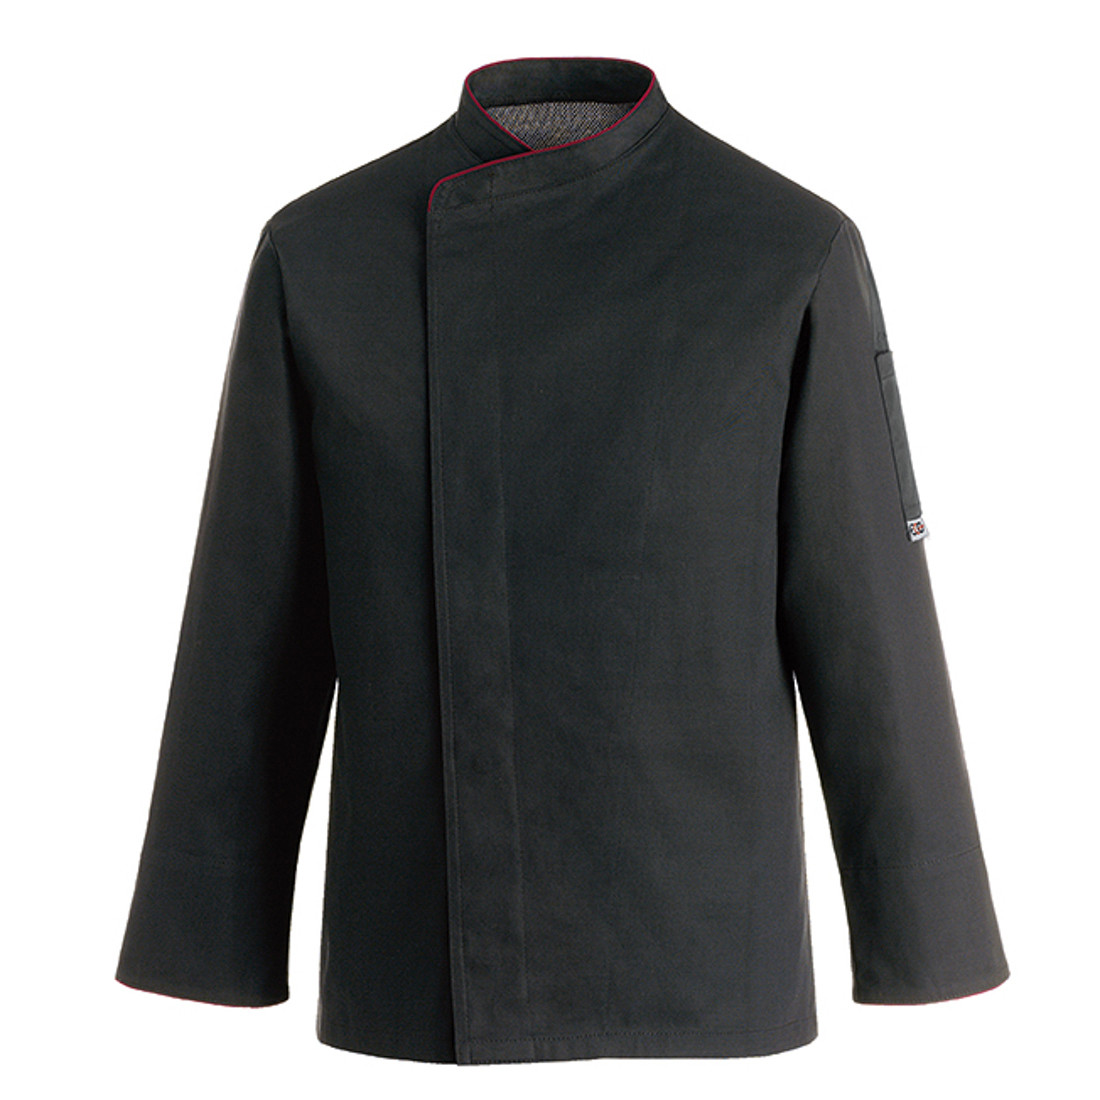 Comfort Chef's Jacket, 65% poliester/35% bumbac - Safetywear